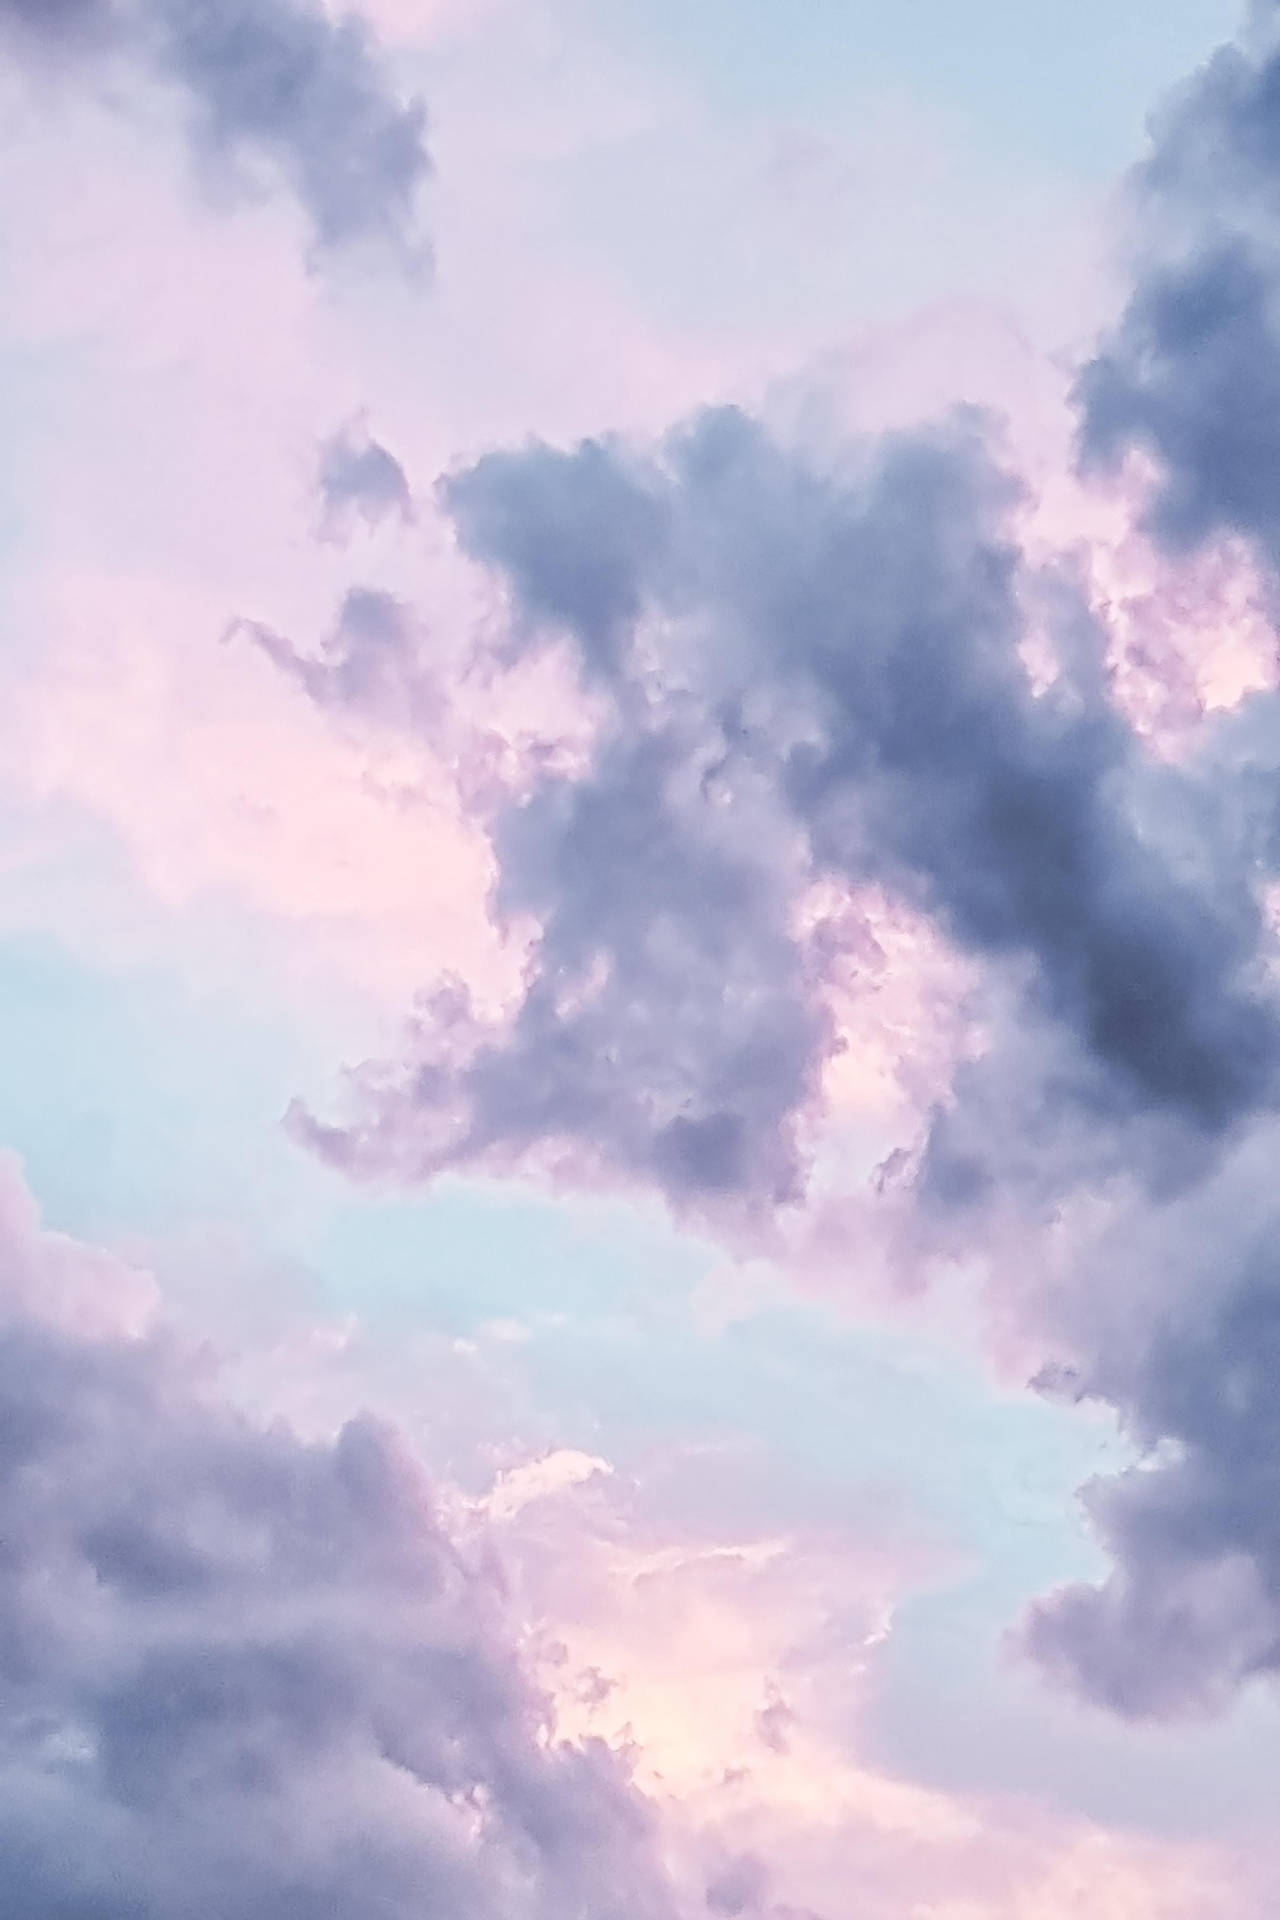 Authentic Aesthetic Cloudy Sky. Background